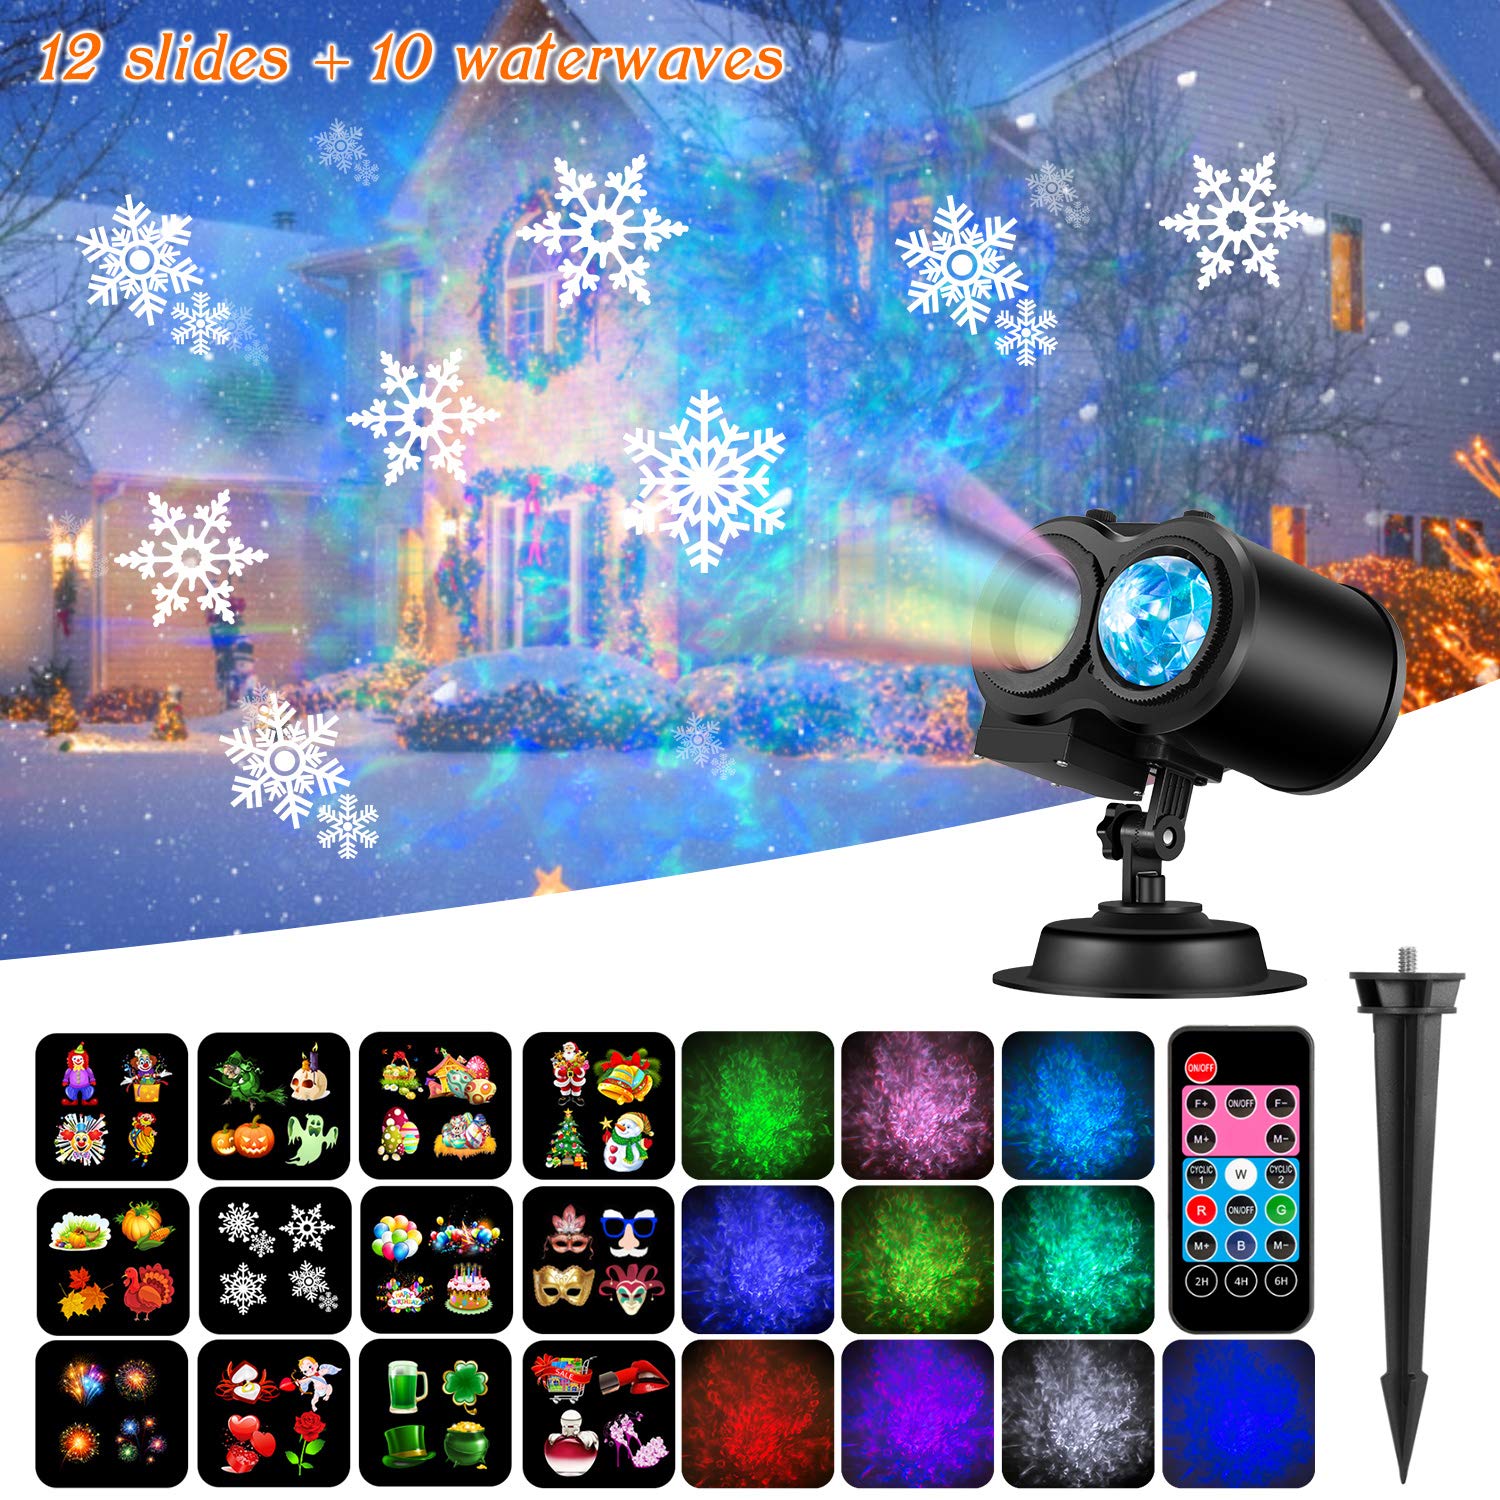 Fitfirst 2-in-1 Christmas Decoration Projector Lights